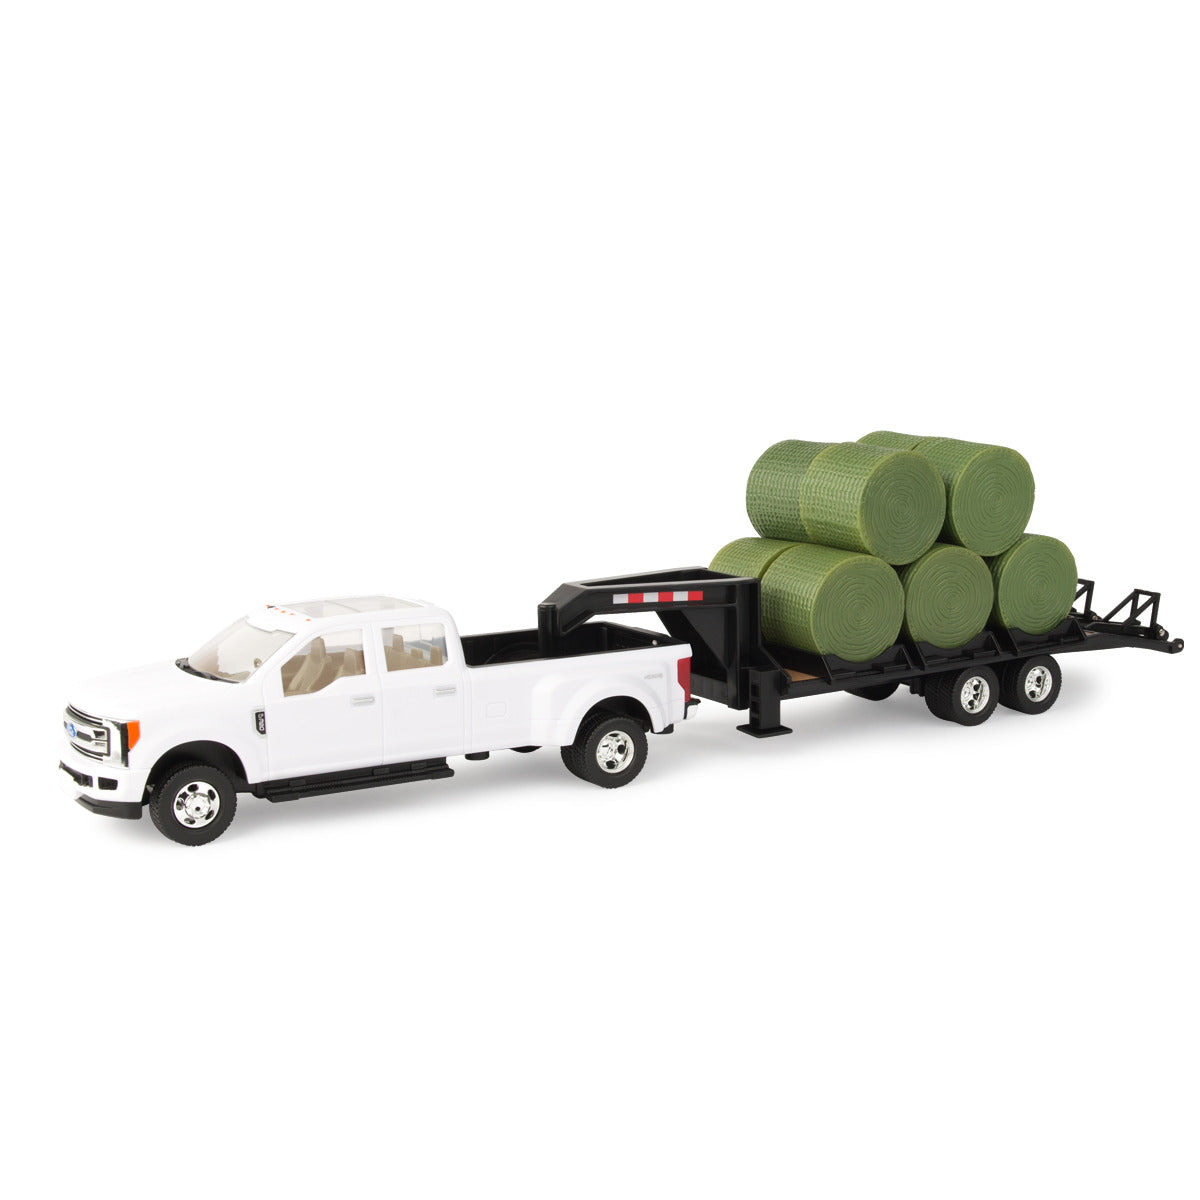 1/32 NEW John Deere Ford F-350 Dually Pickup w/Trailer & Bales Ages 3 LP68114 